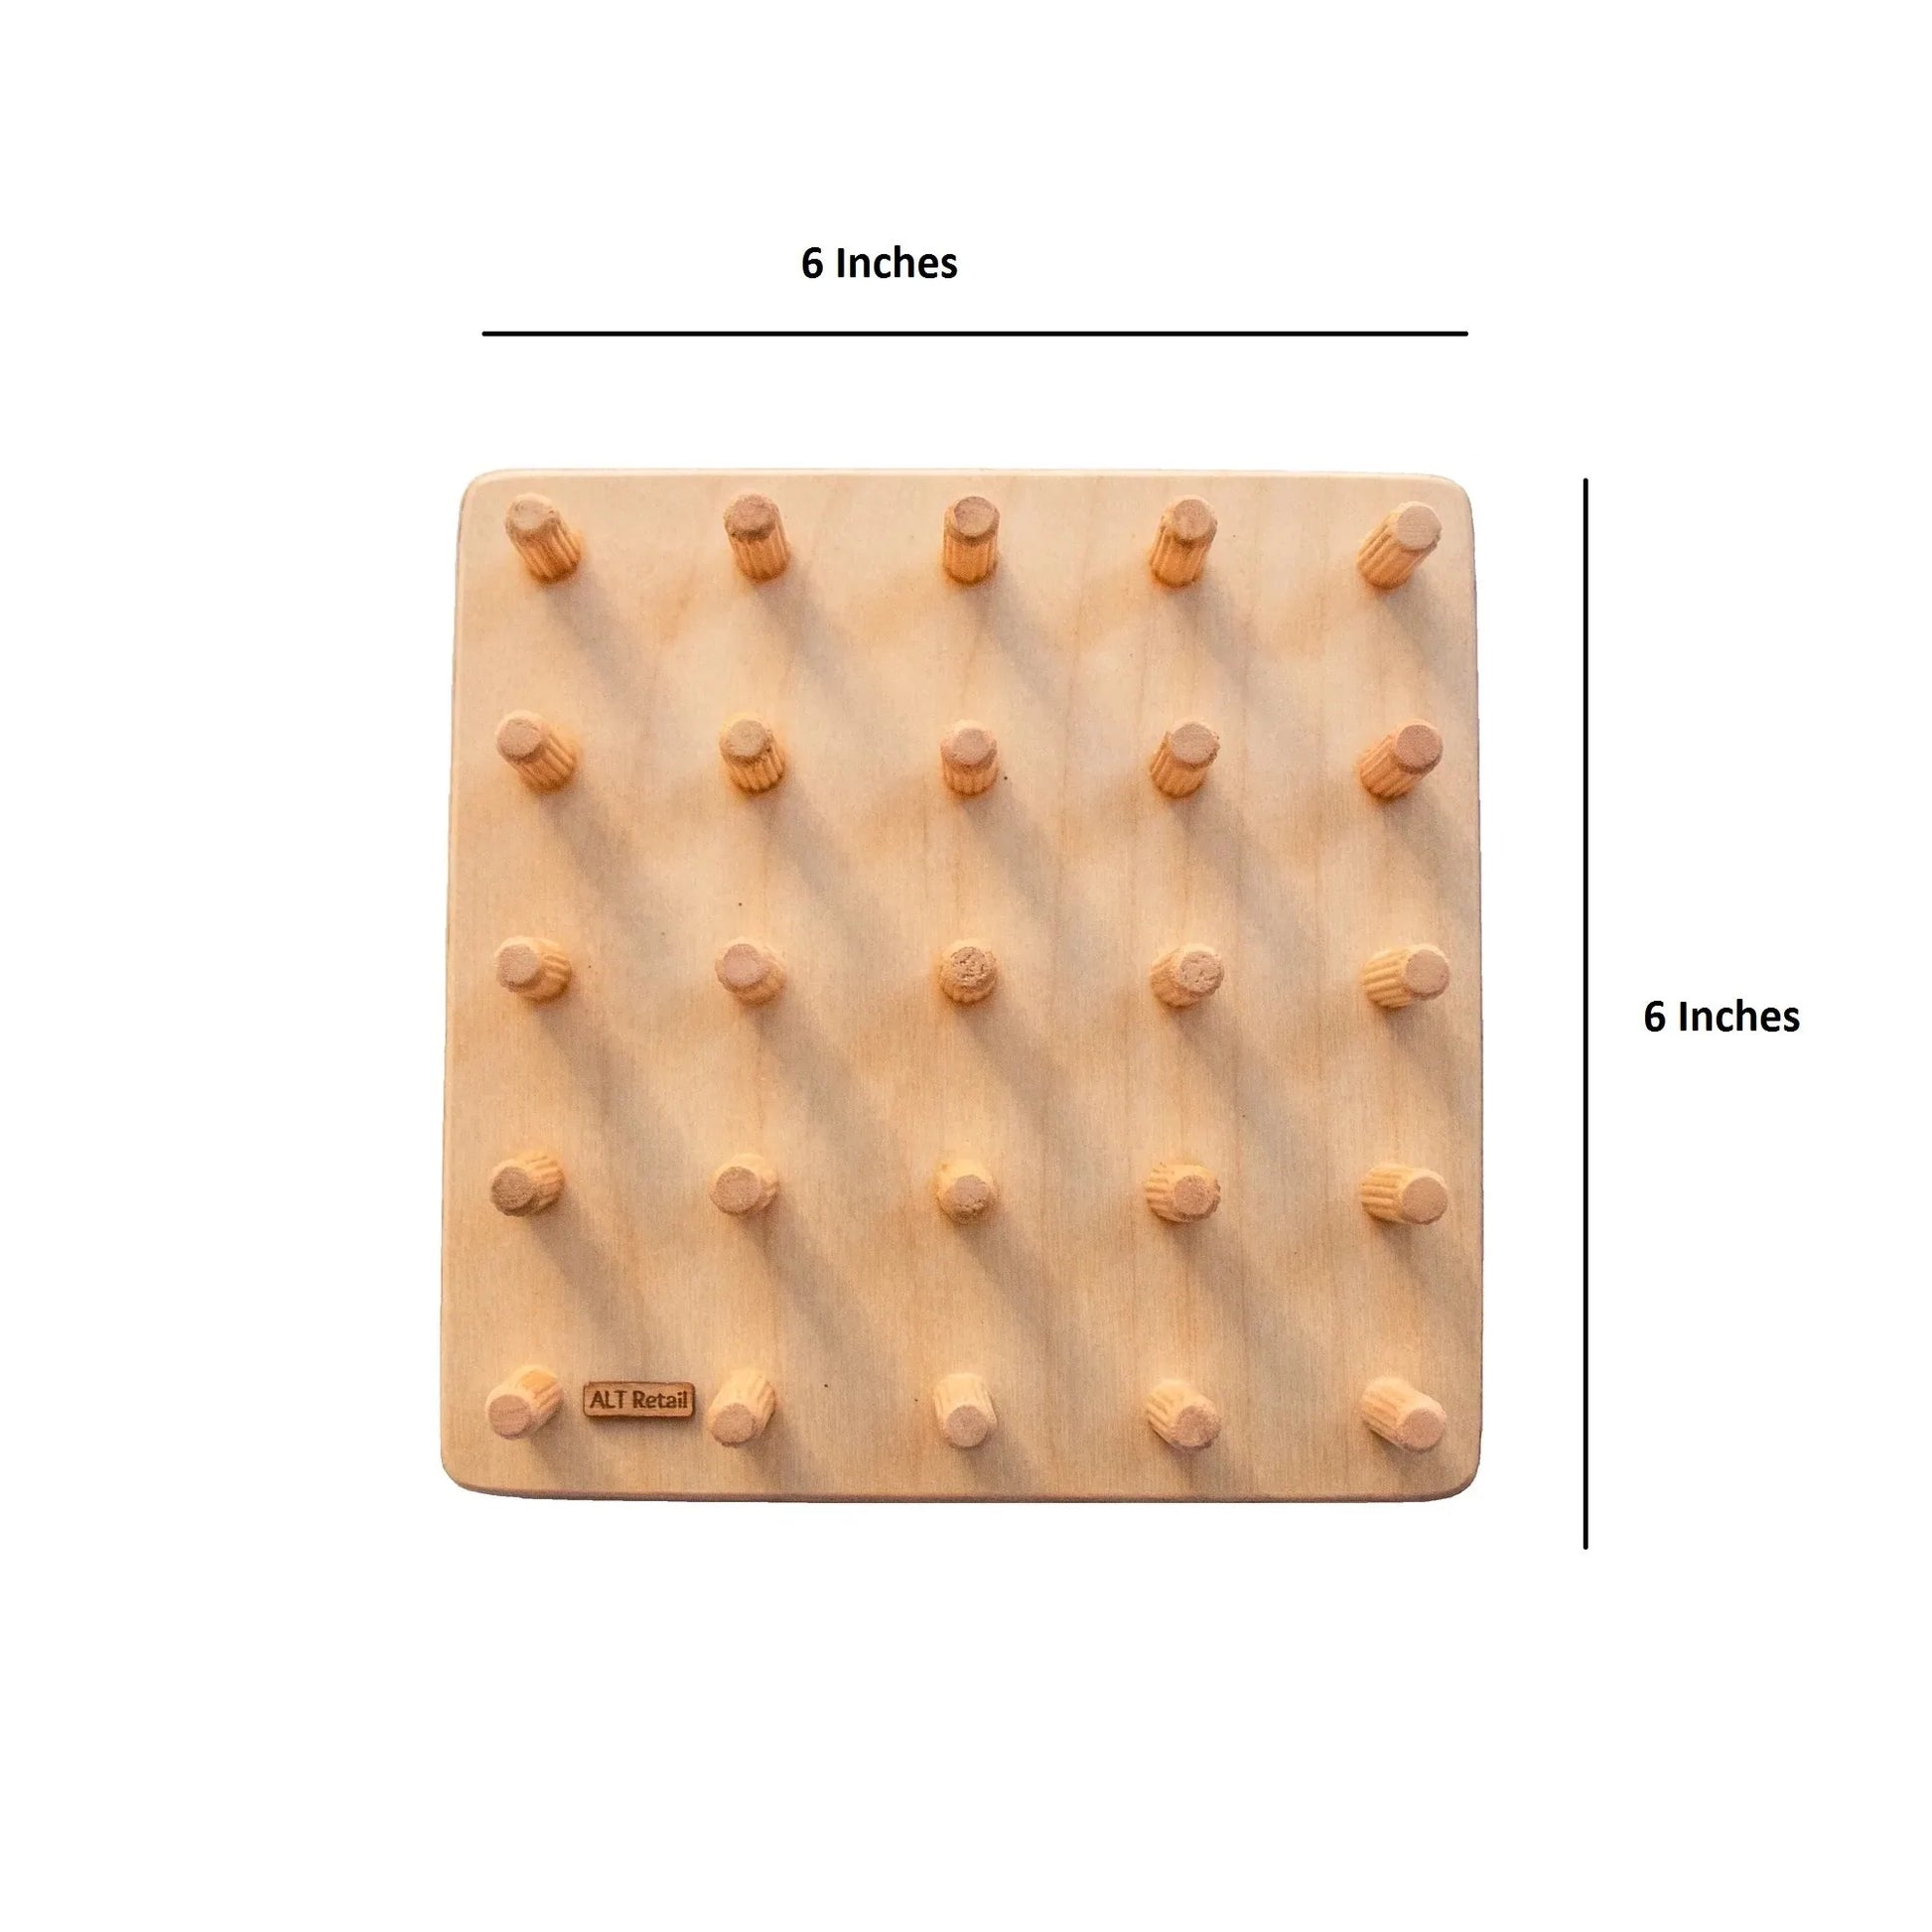 Buy Wooden Geoboard - Dimensions - SkilloToys.comBuy Wooden Geoboard - Dimensions - SkilloToys.com